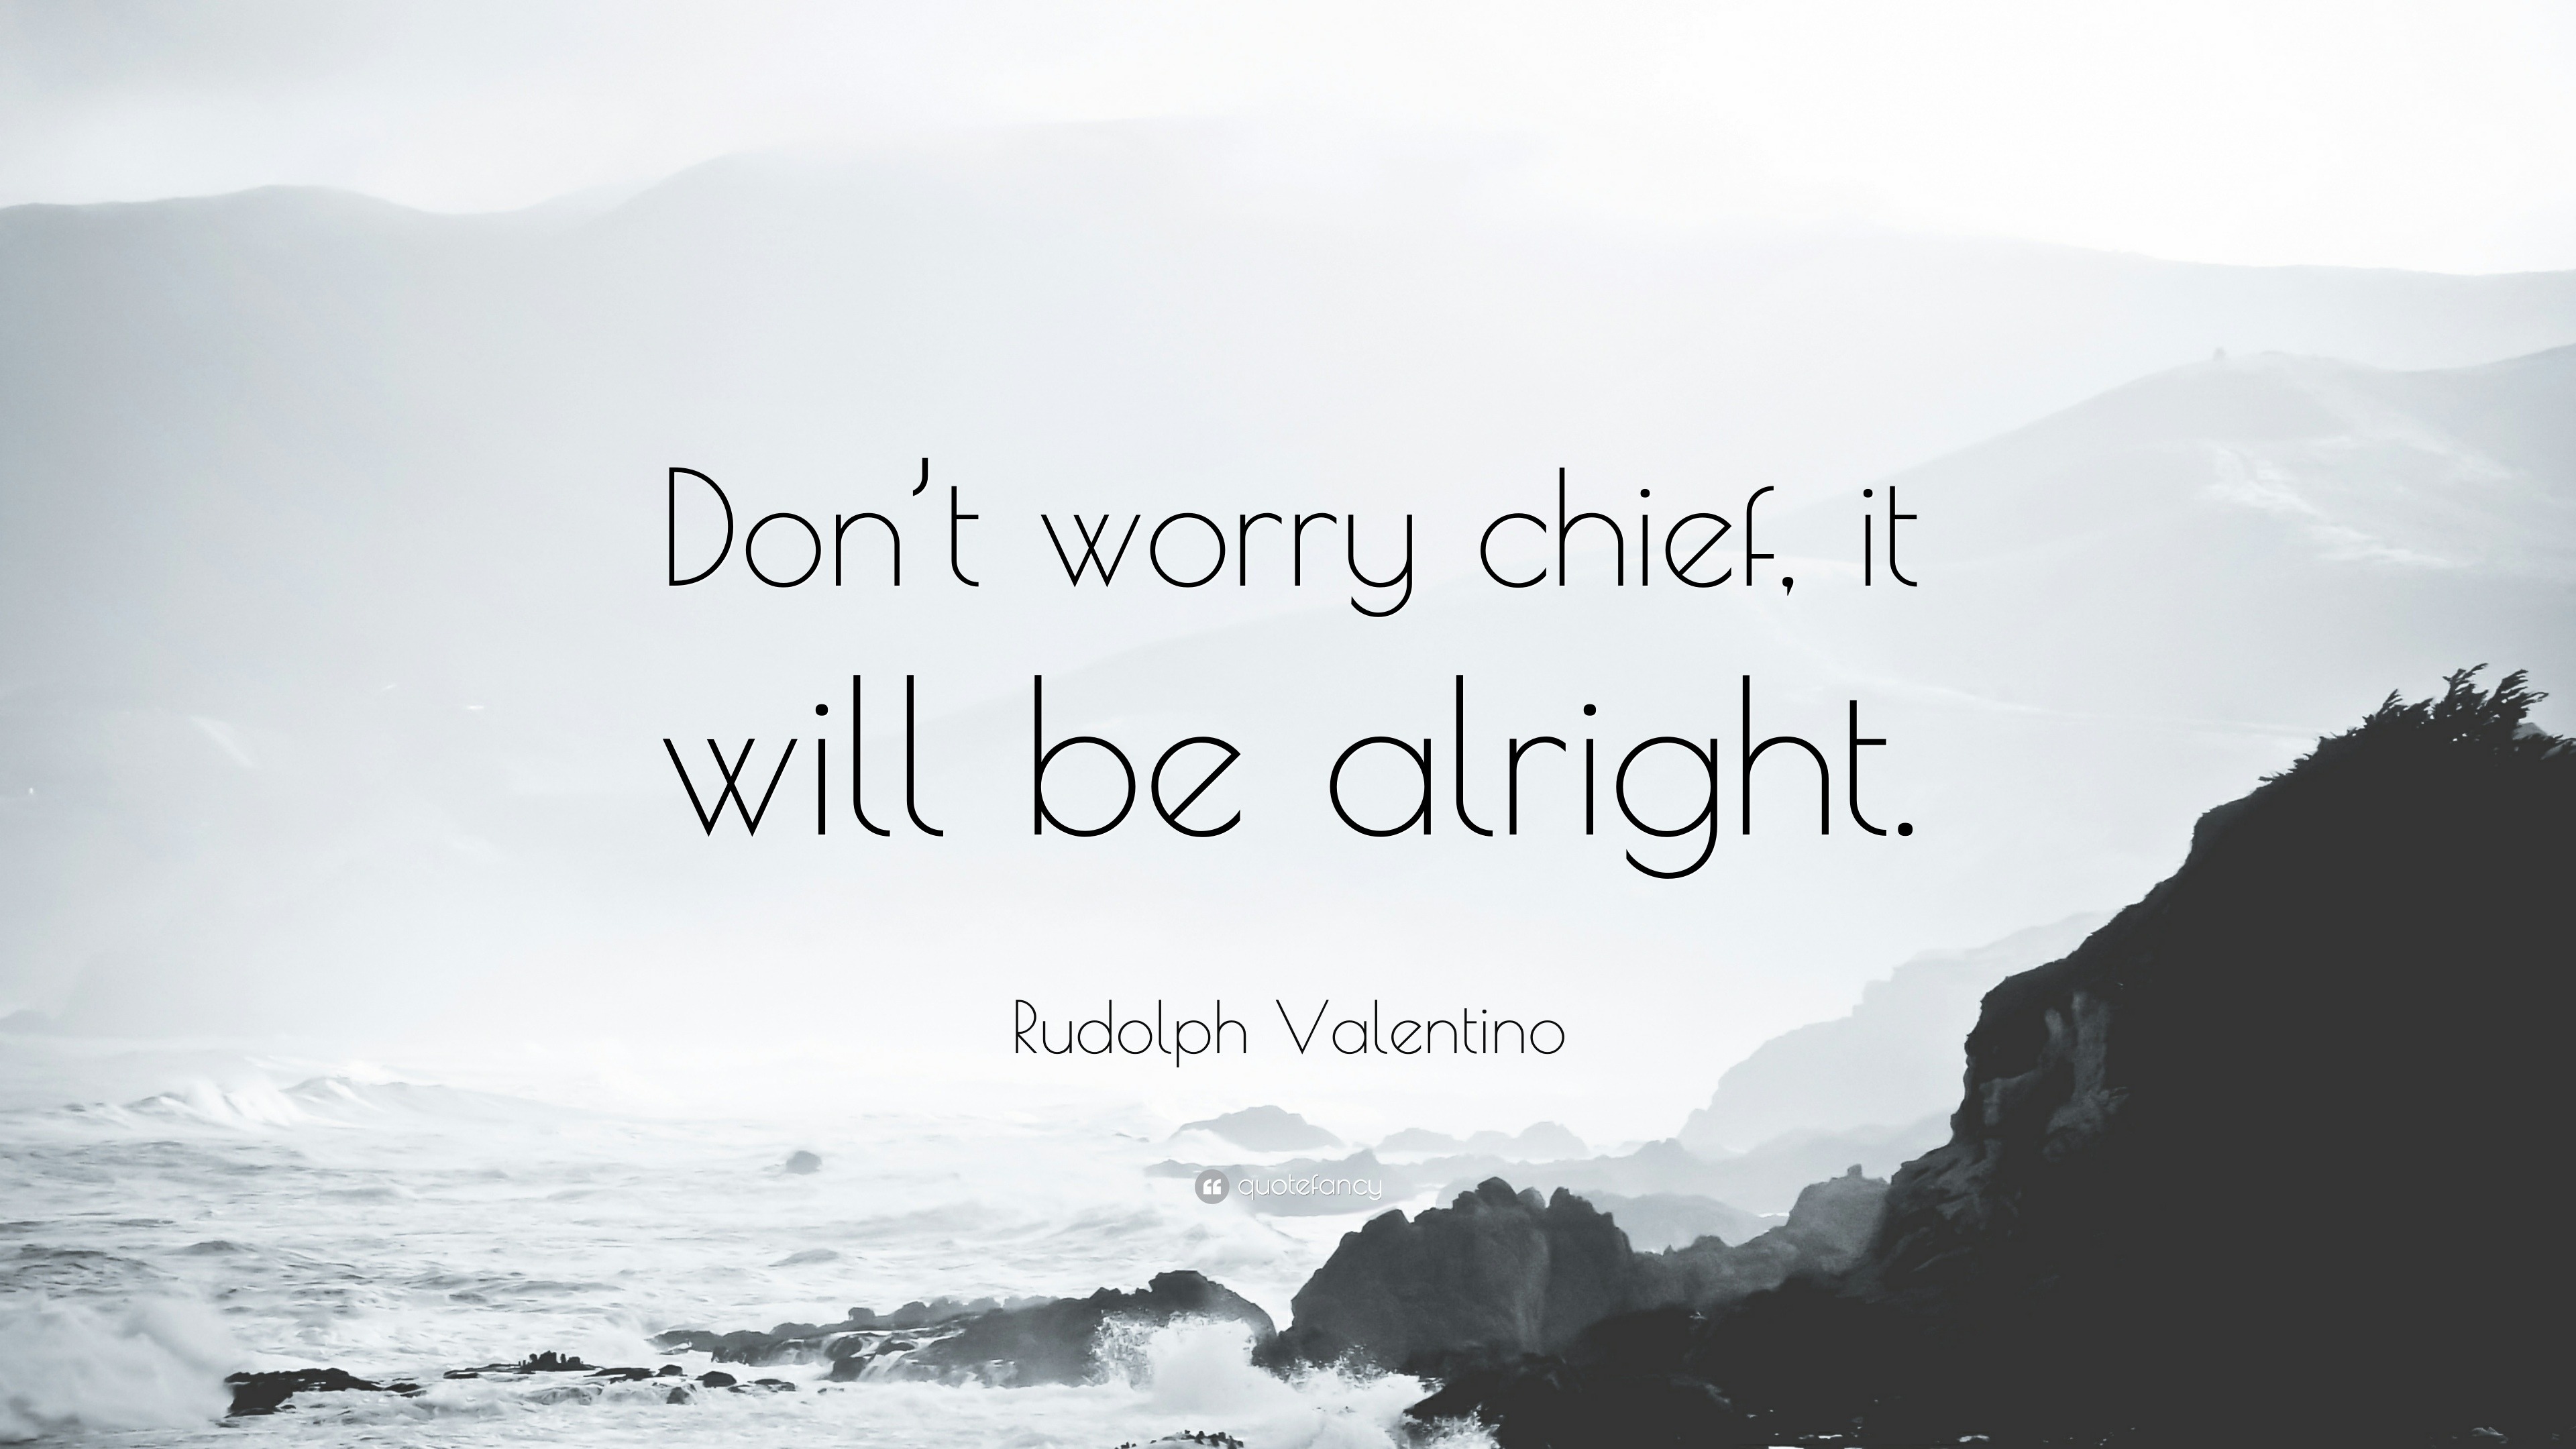 hat Kollisionskursus levering Rudolph Valentino Quote: “Don't worry chief, it will be alright.”